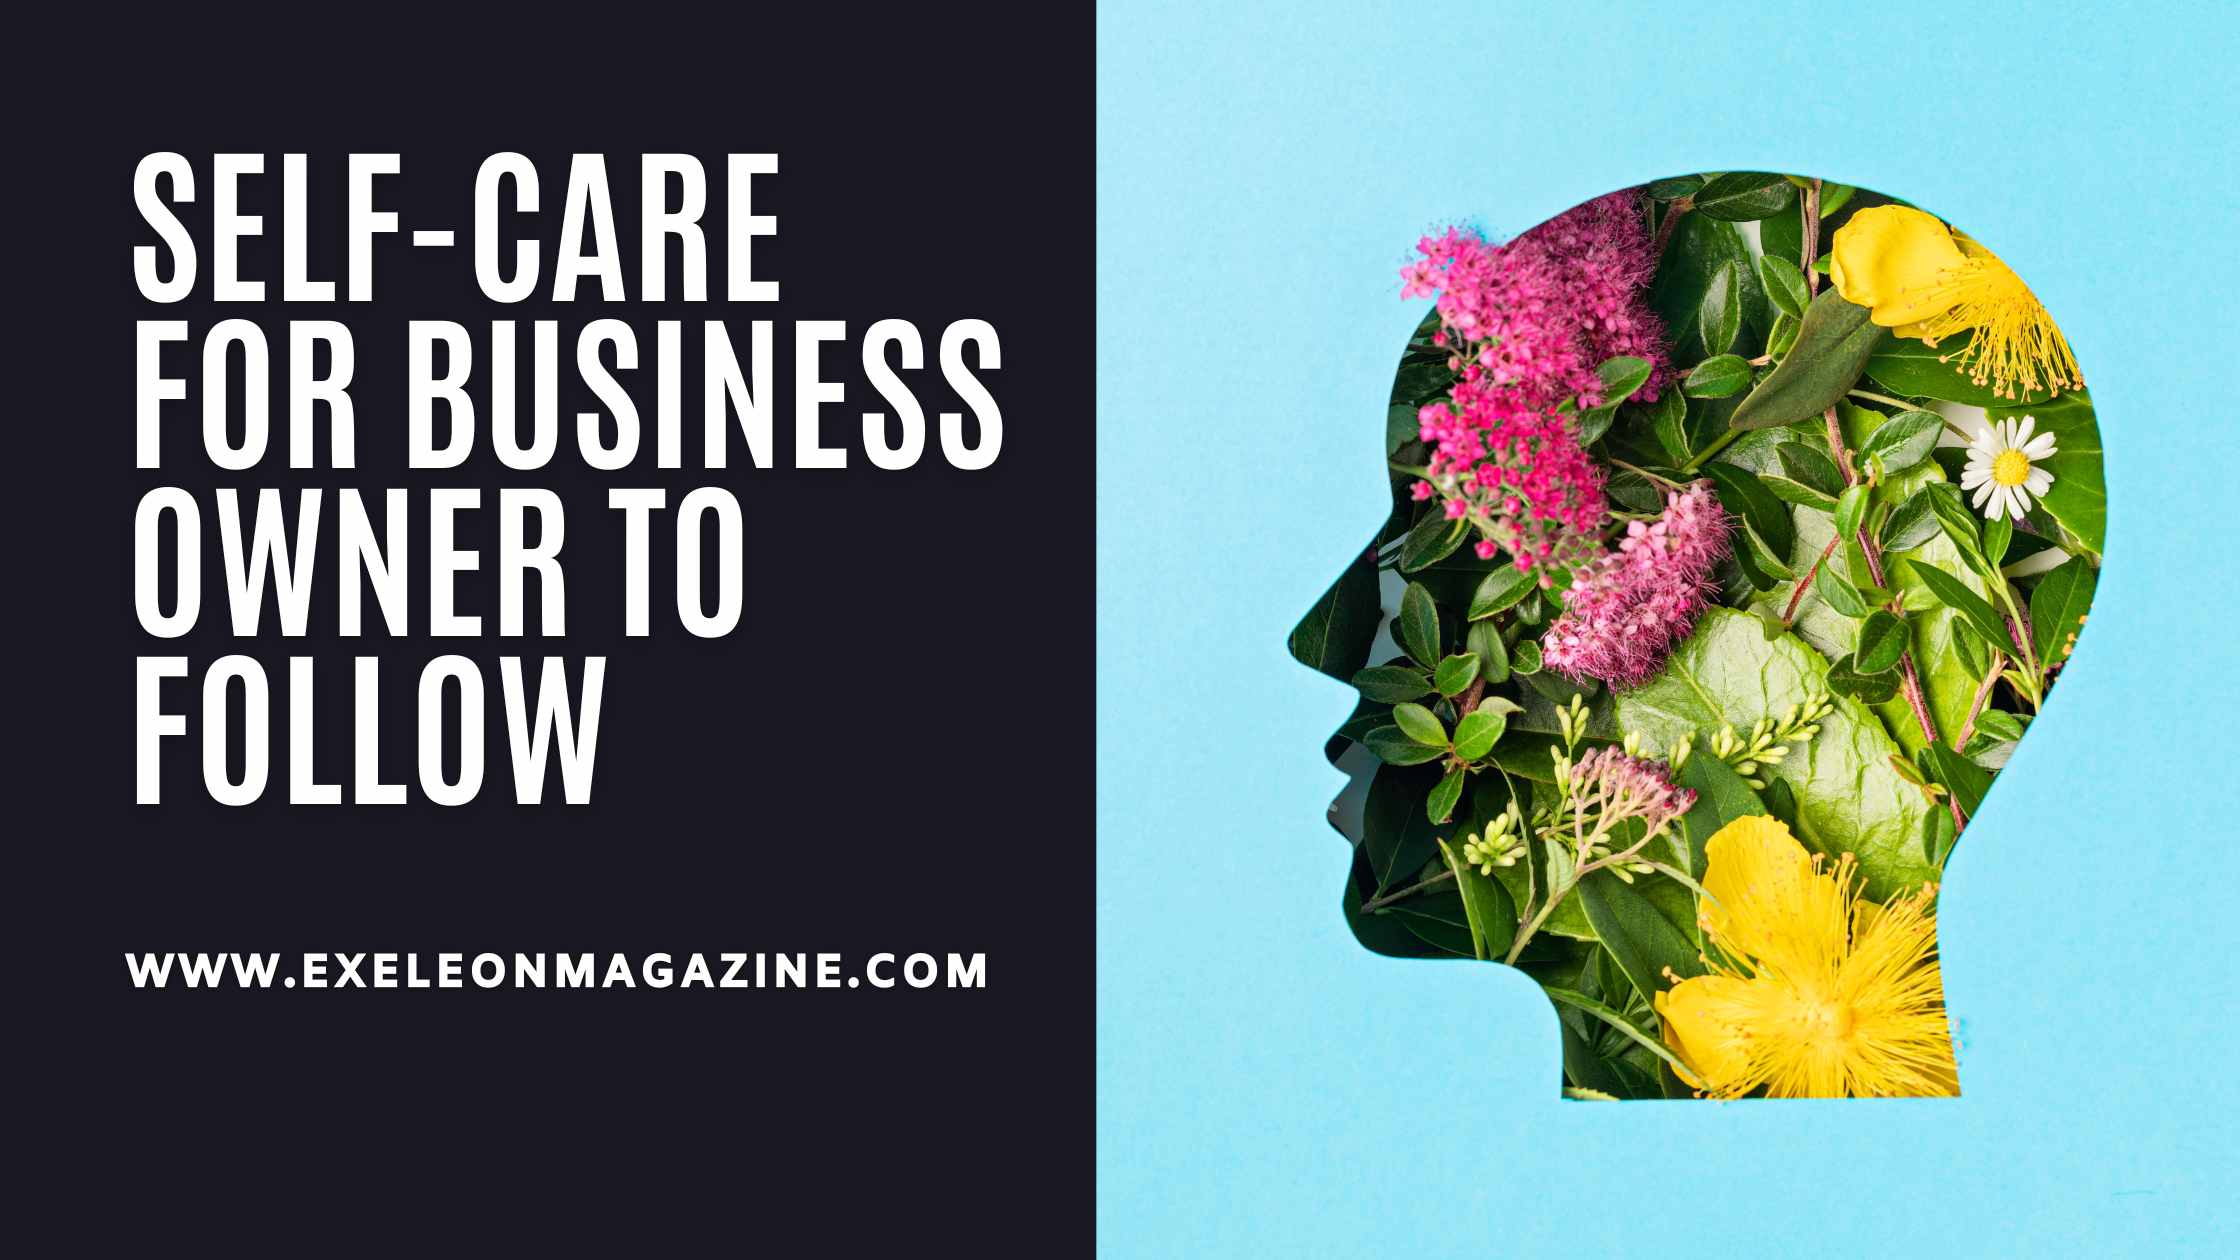 Self-care for Business Owner to Follow